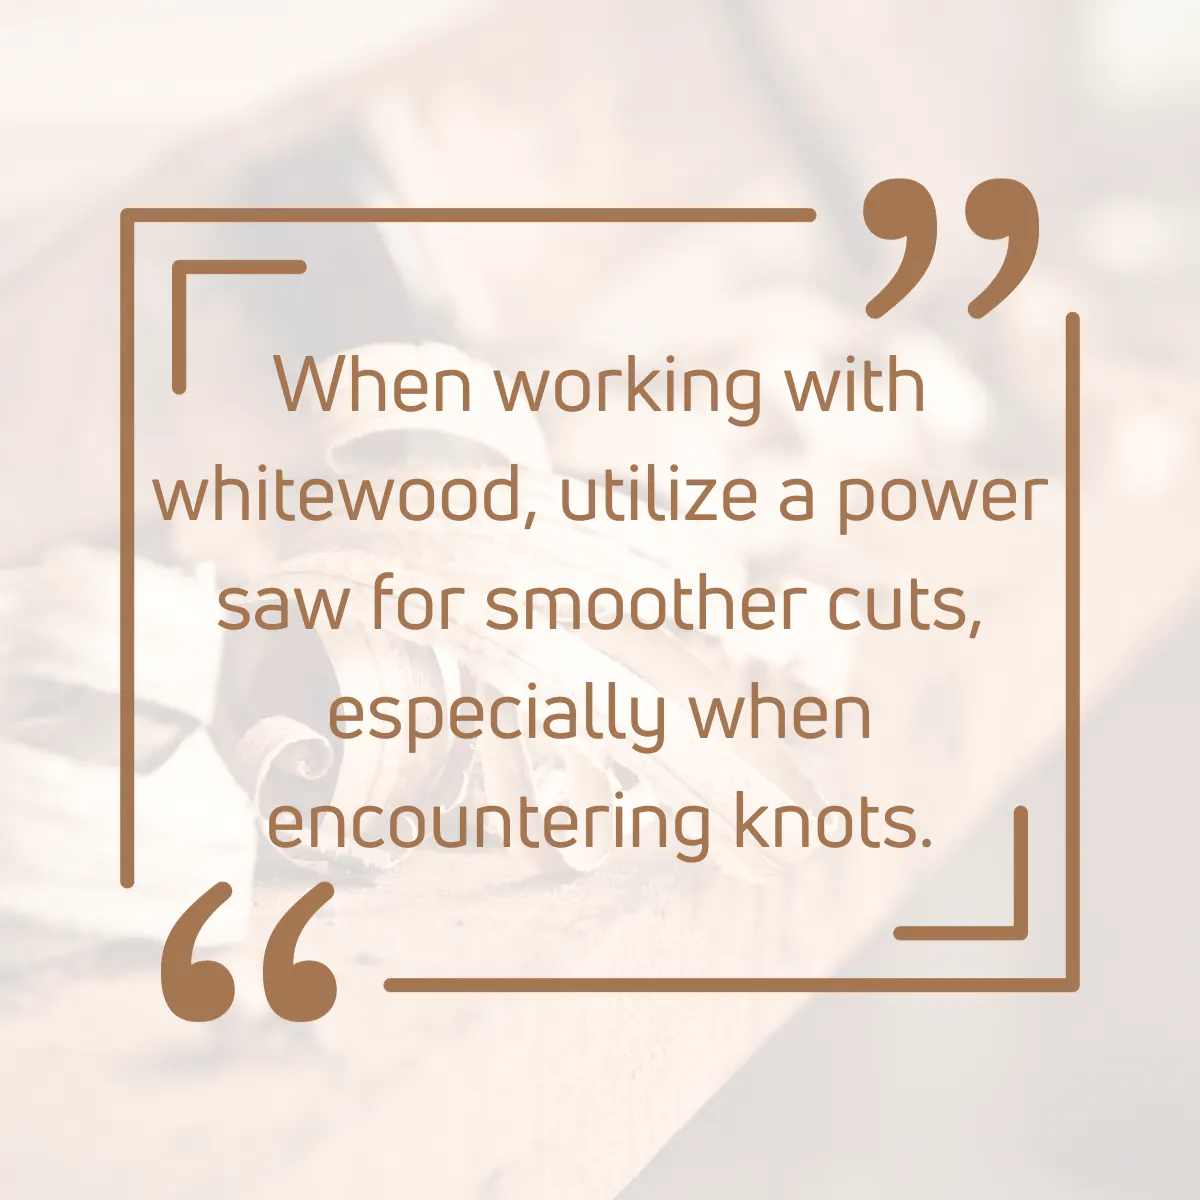 Tip for working with Whitewoods